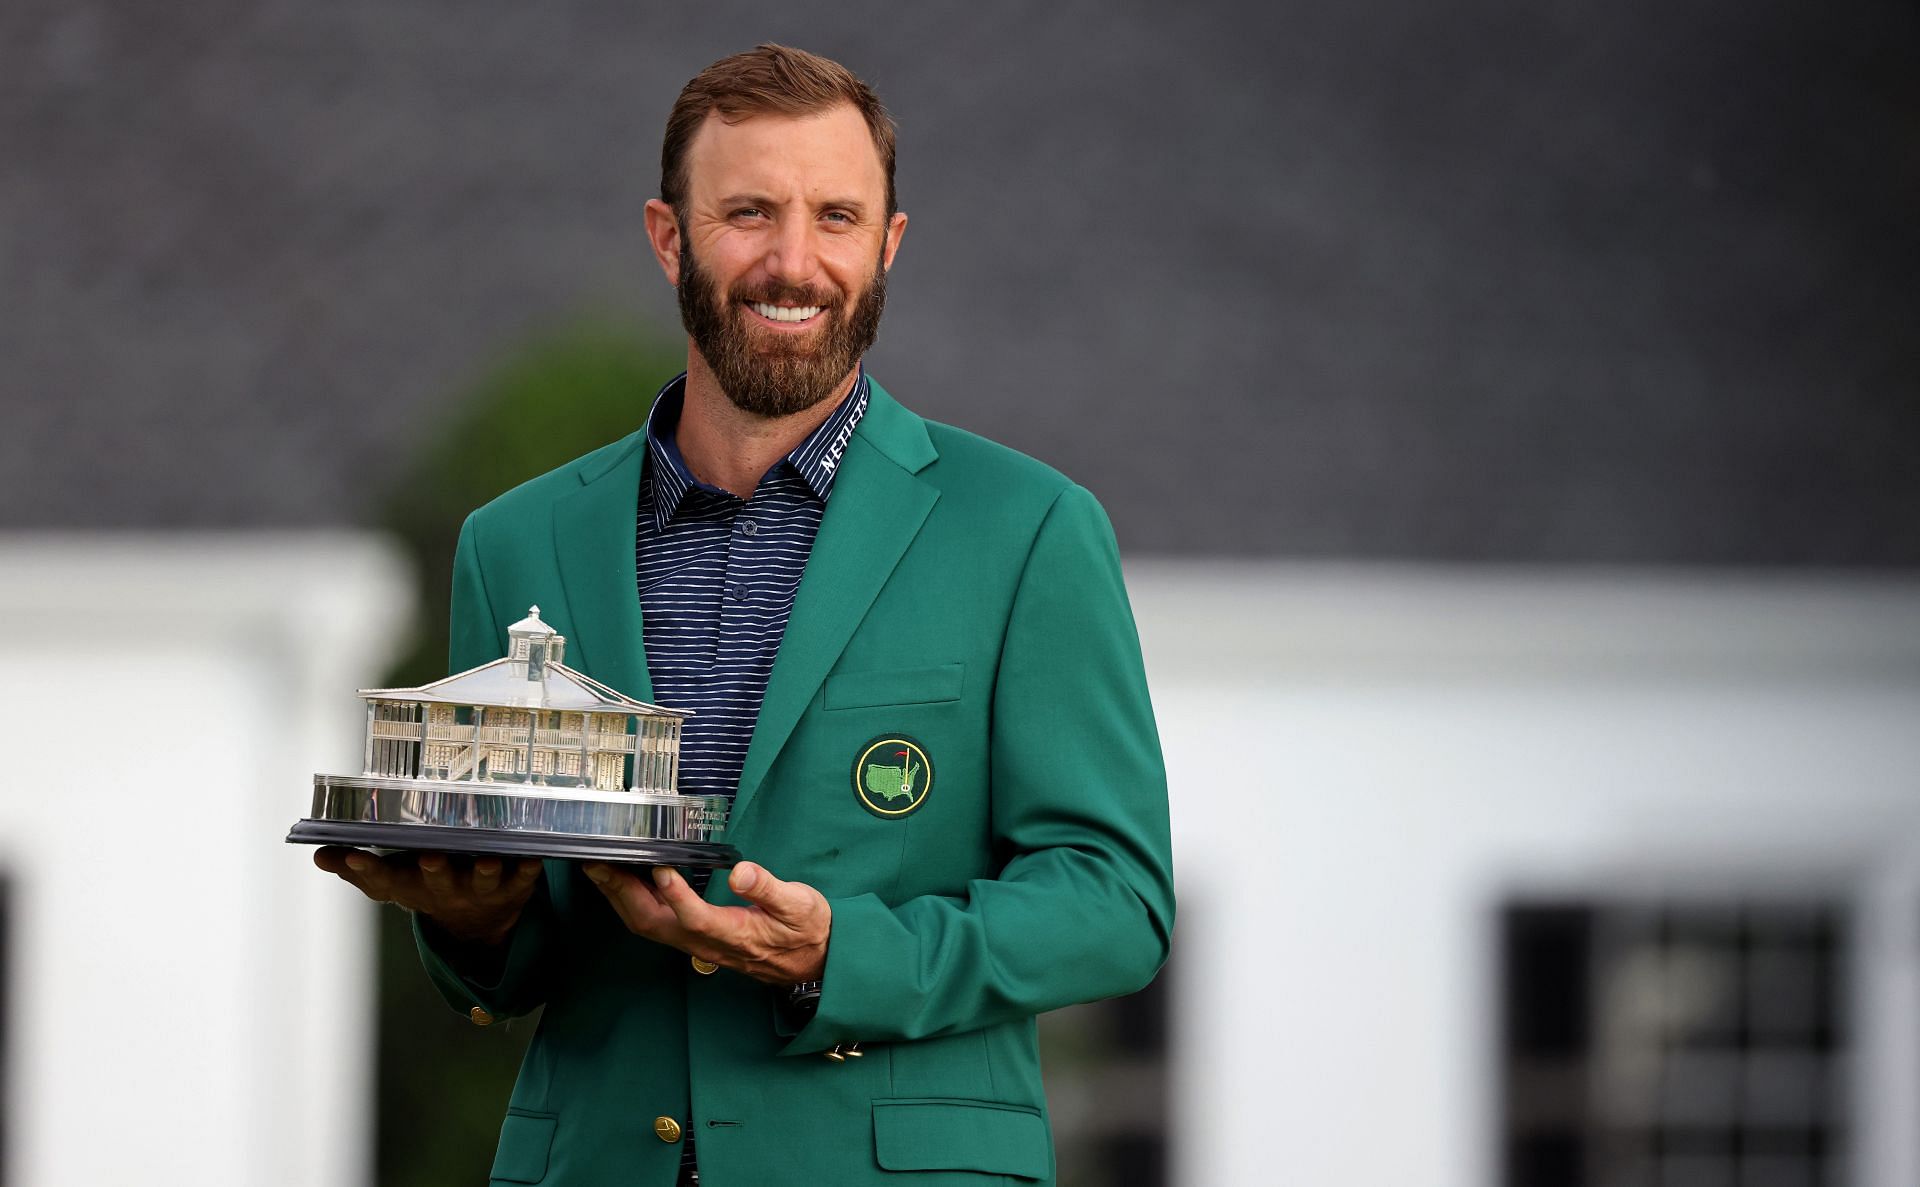 Johnson with the 2020 Masters trophy and green jacket - Final Round